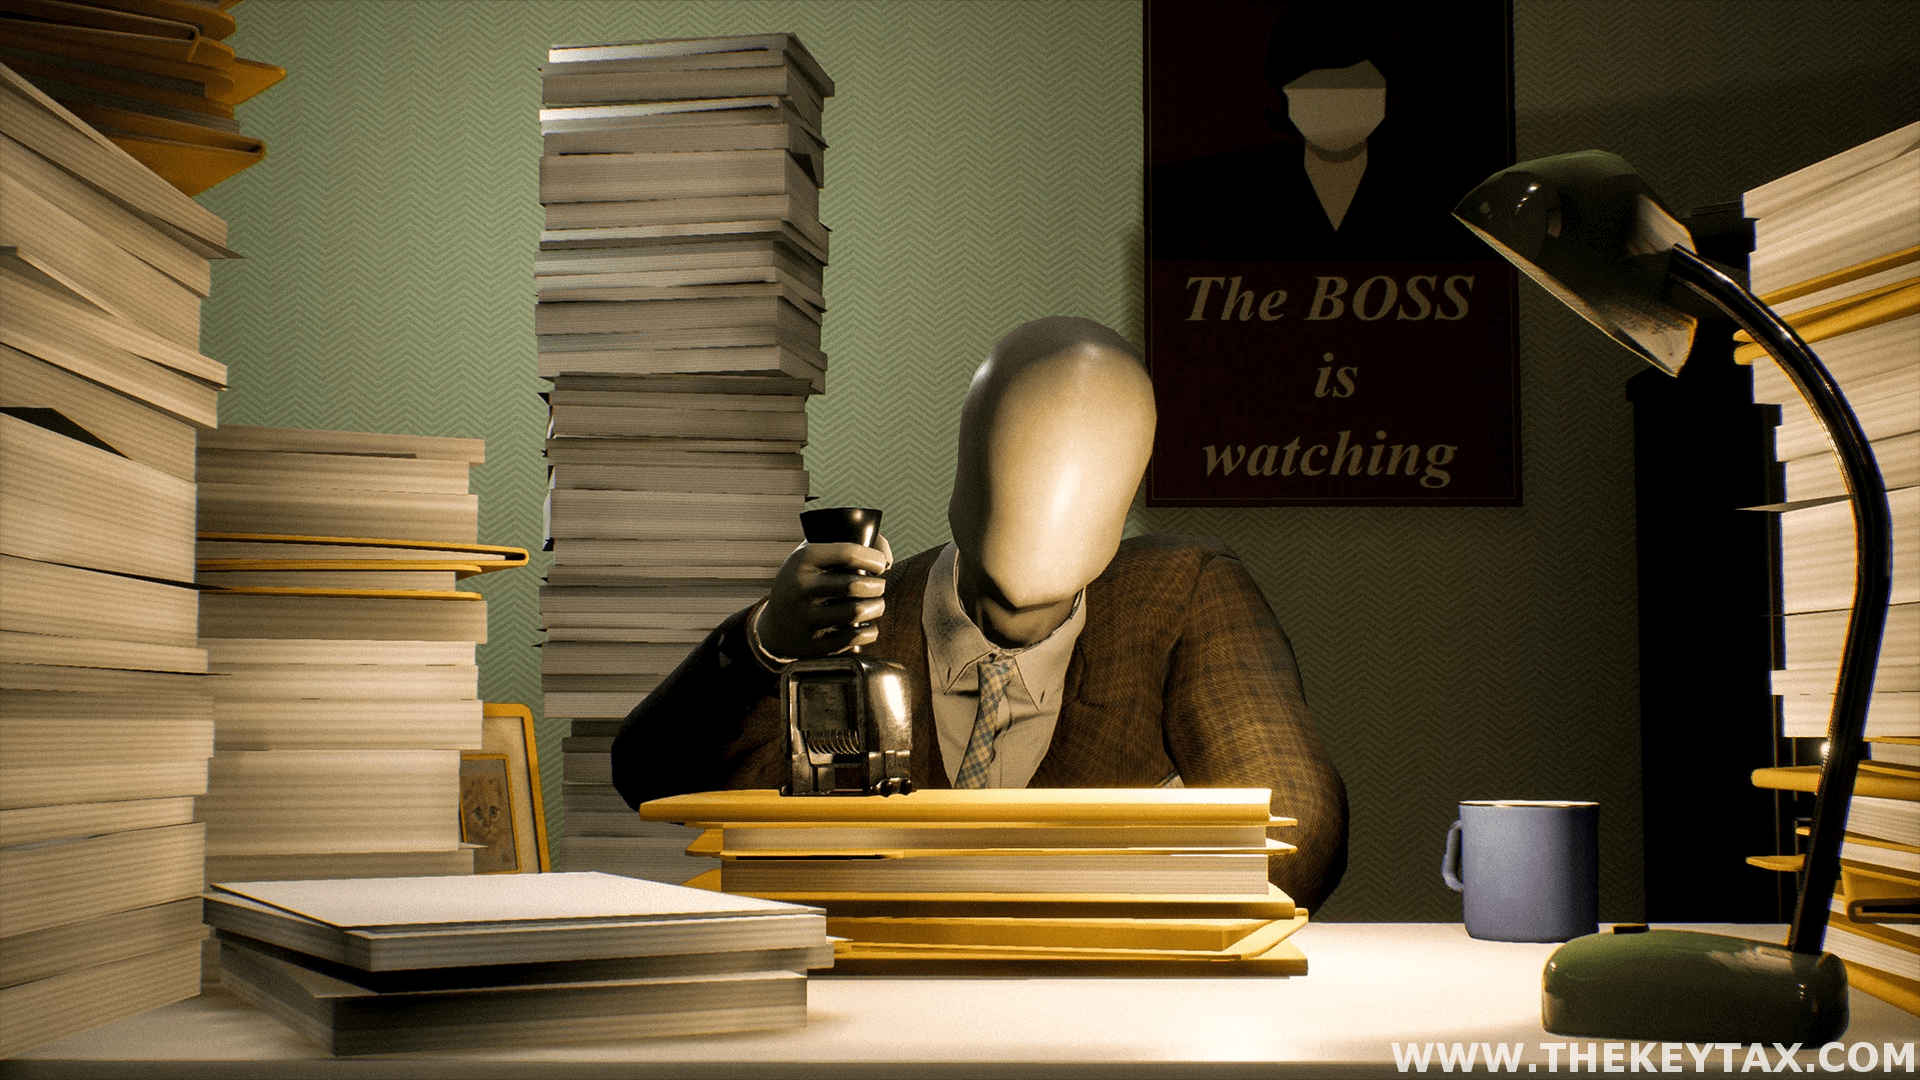 A mannequin stamping paperwork in an office environment.